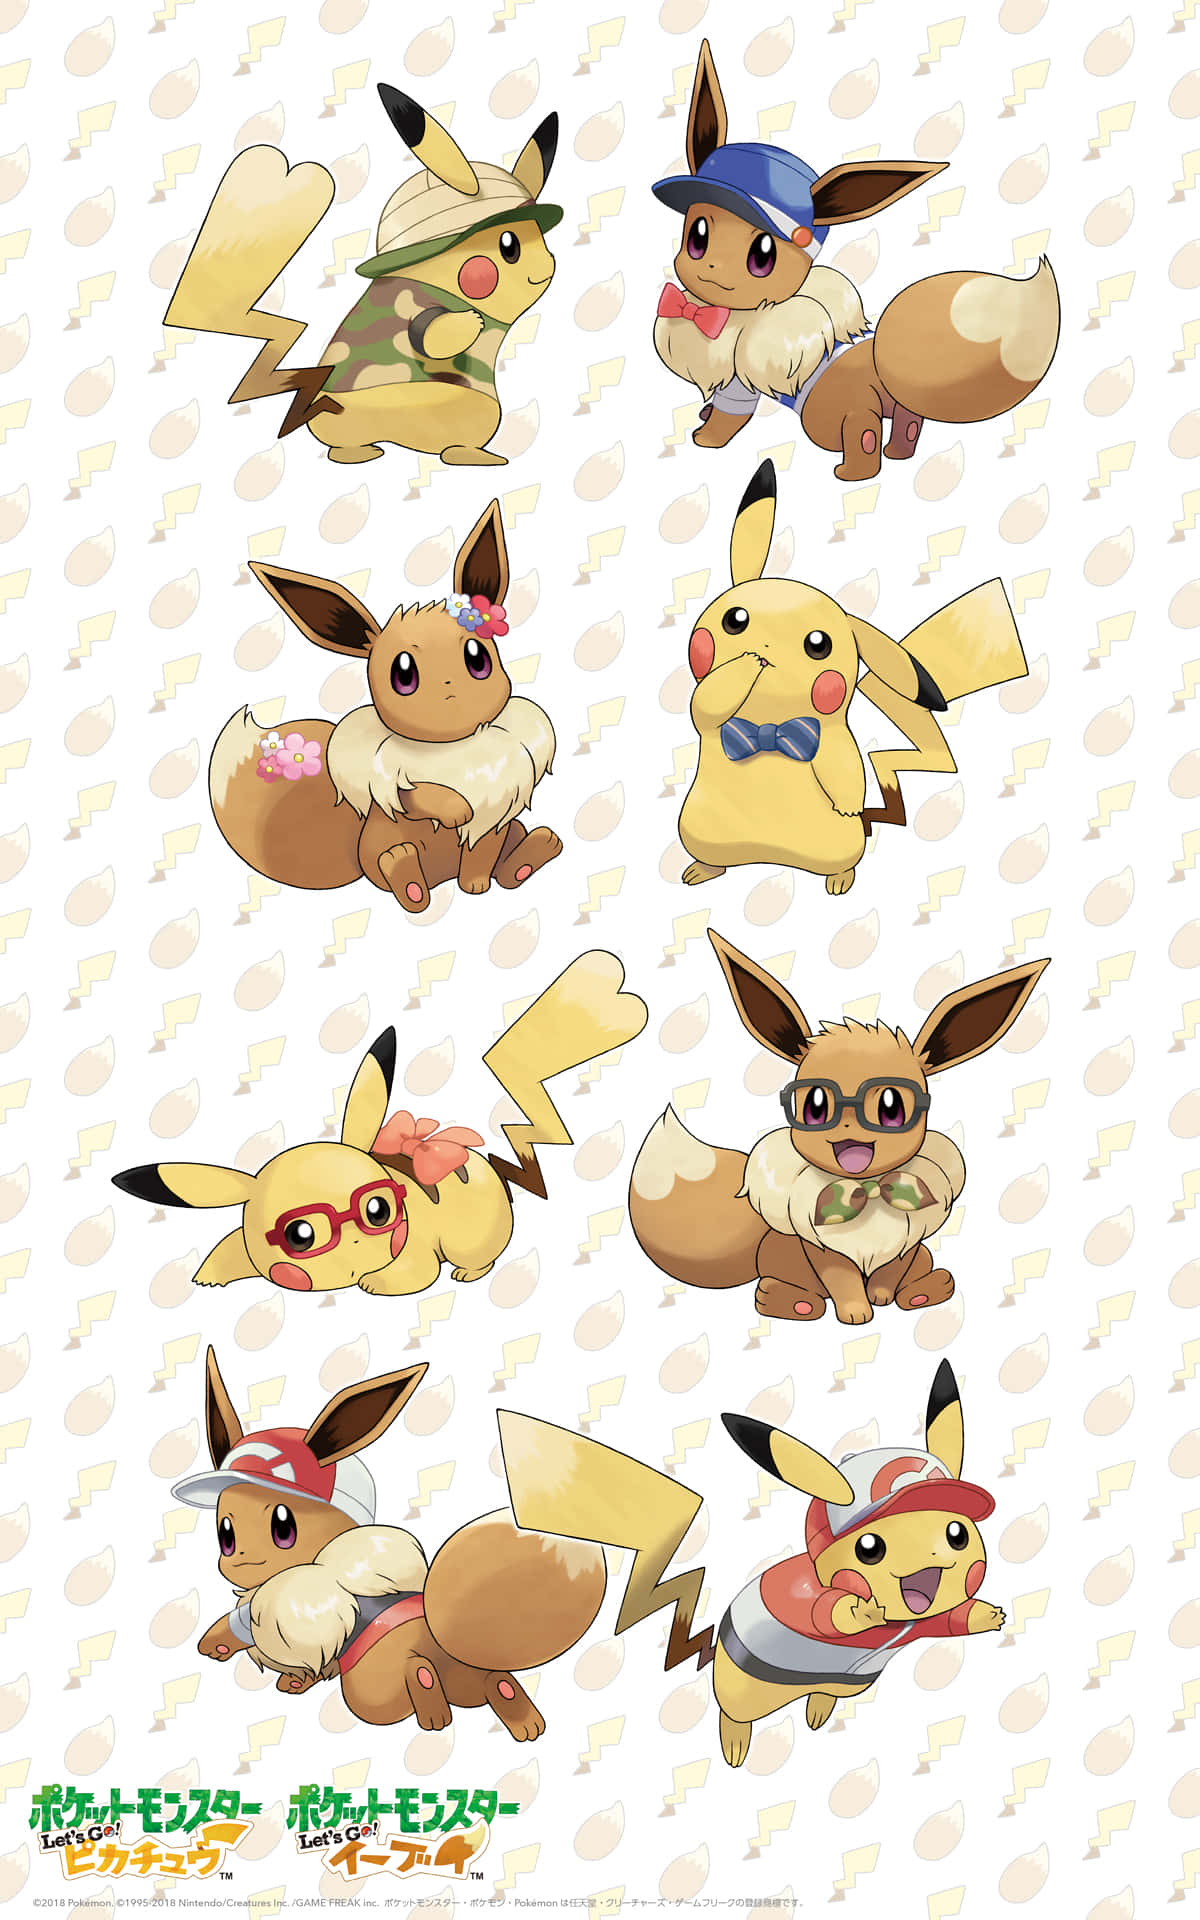 Cute Pikachu And Eevee Play Together Wallpaper